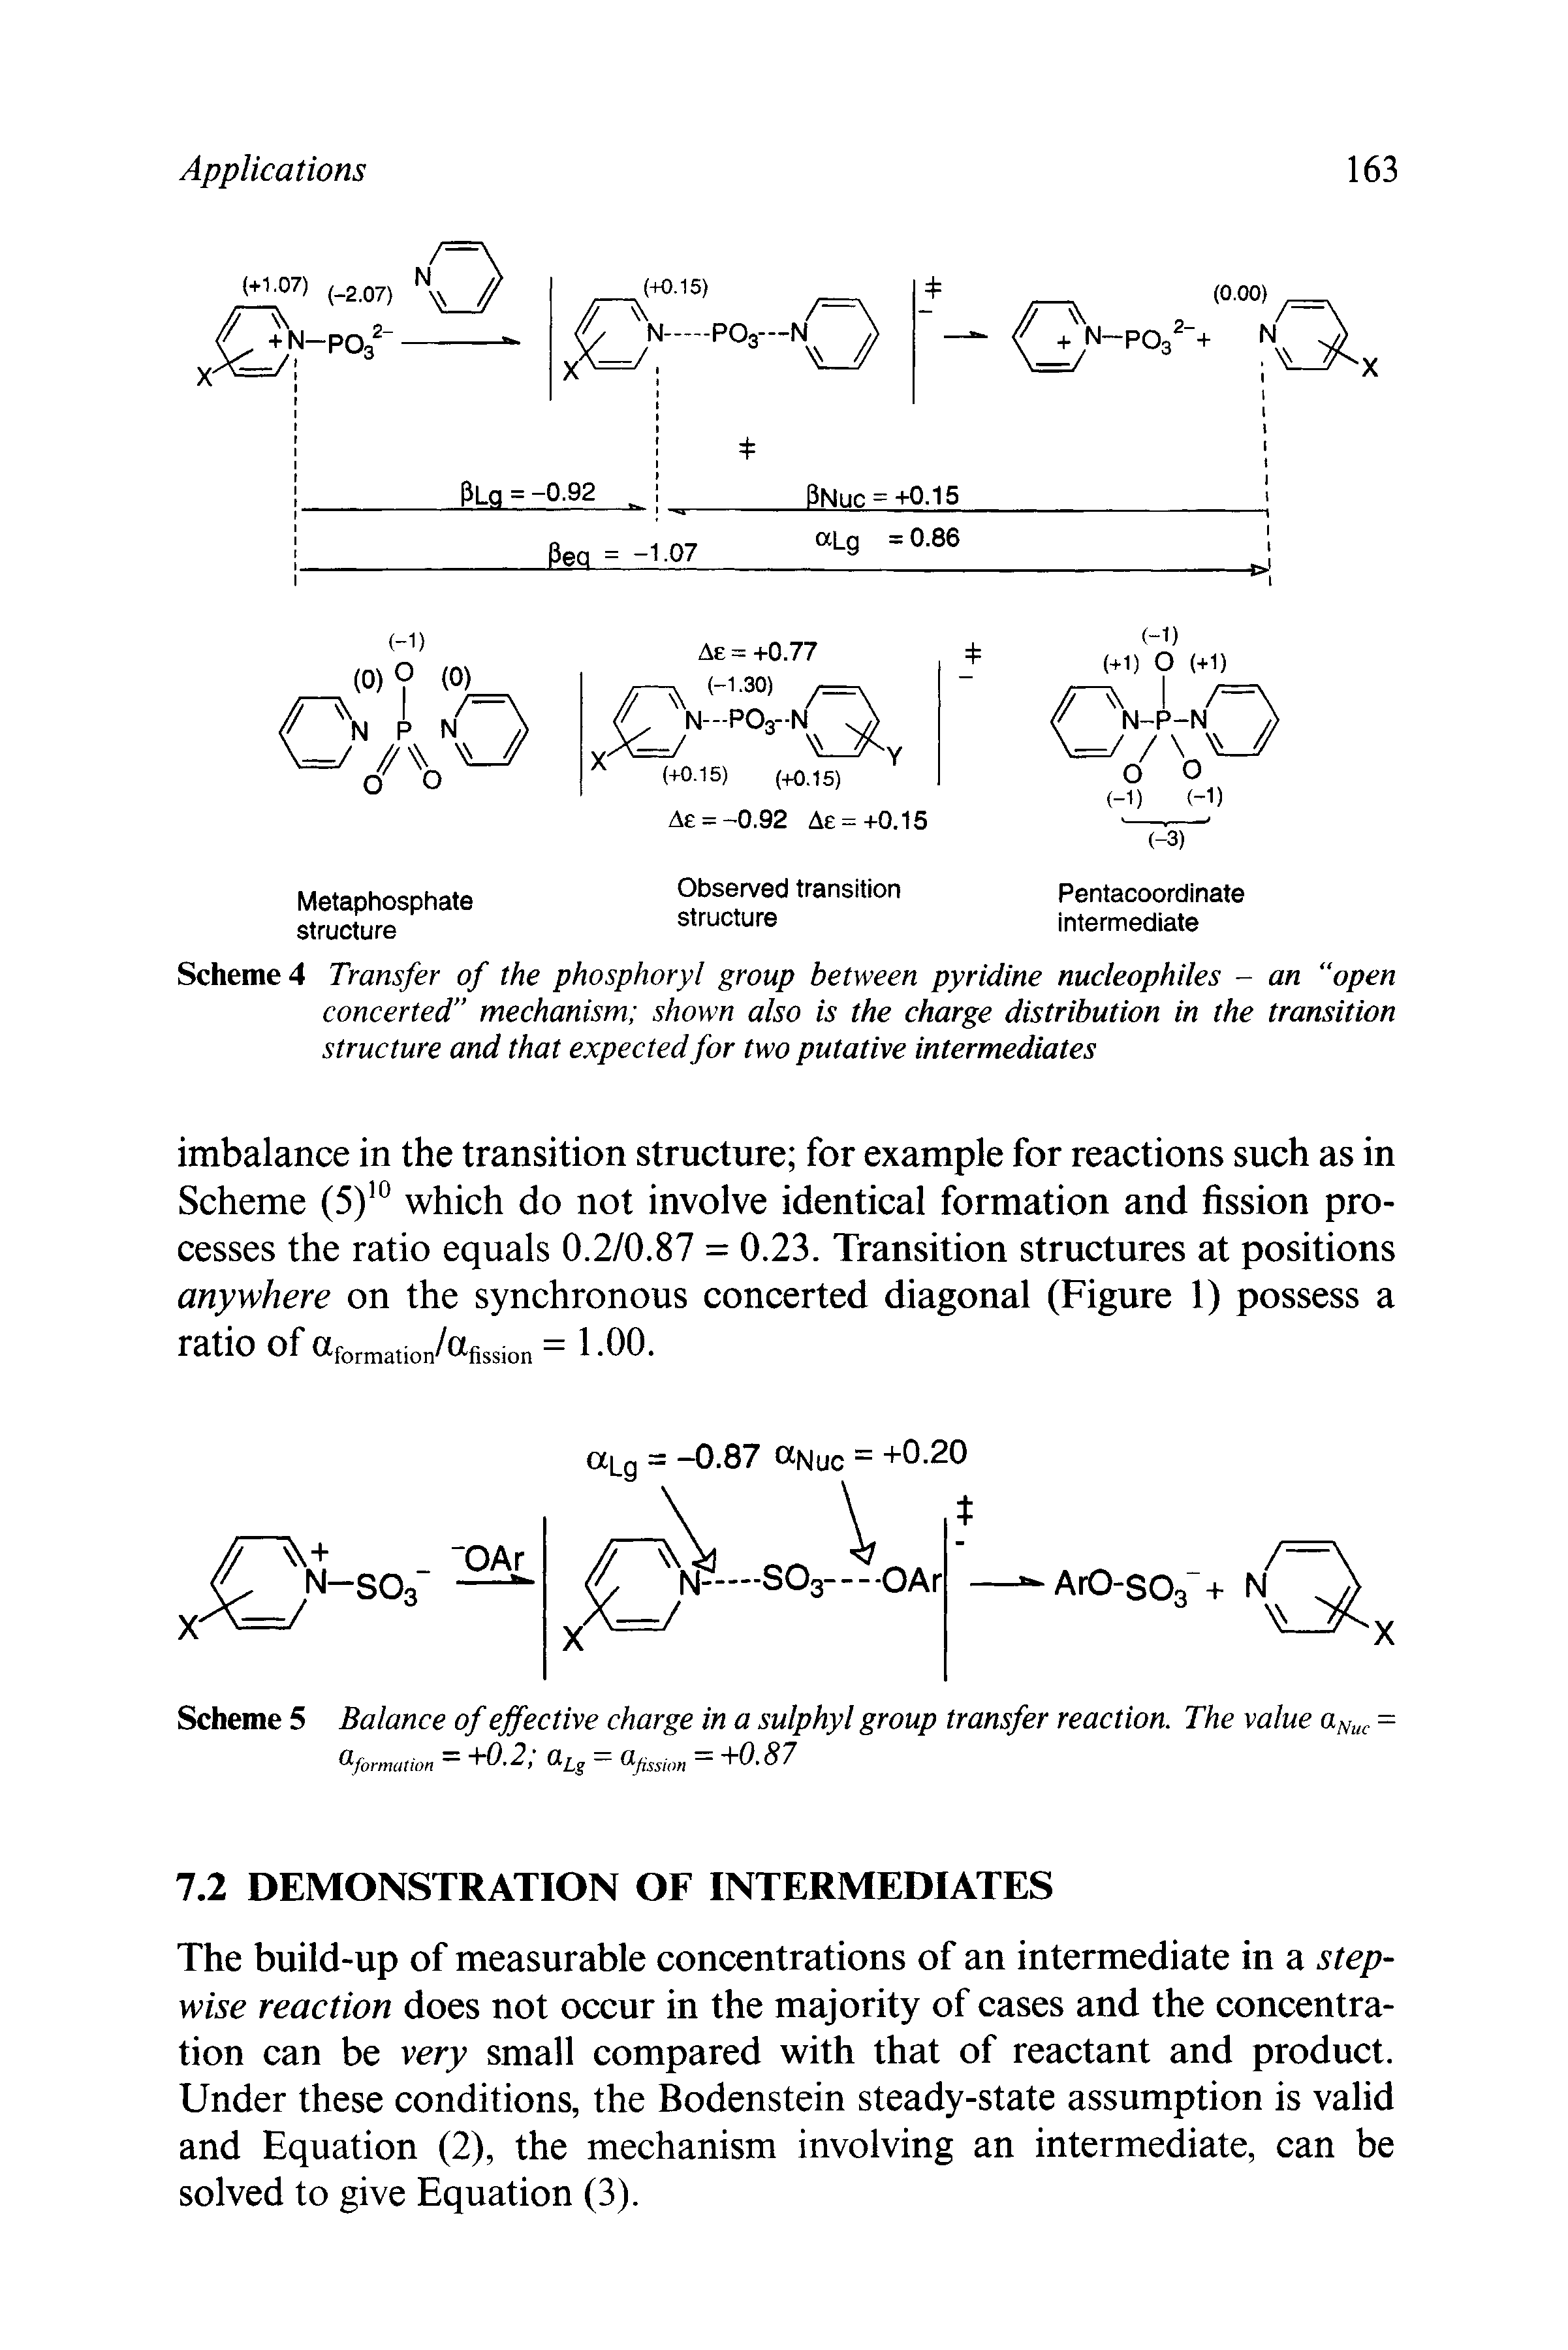 Scheme 4 Transfer of the phosphoryl group between pyridine nucleophiles - an open concerted mechanism shown also is the charge distribution in the transition structure and that expected for two putative intermediates...